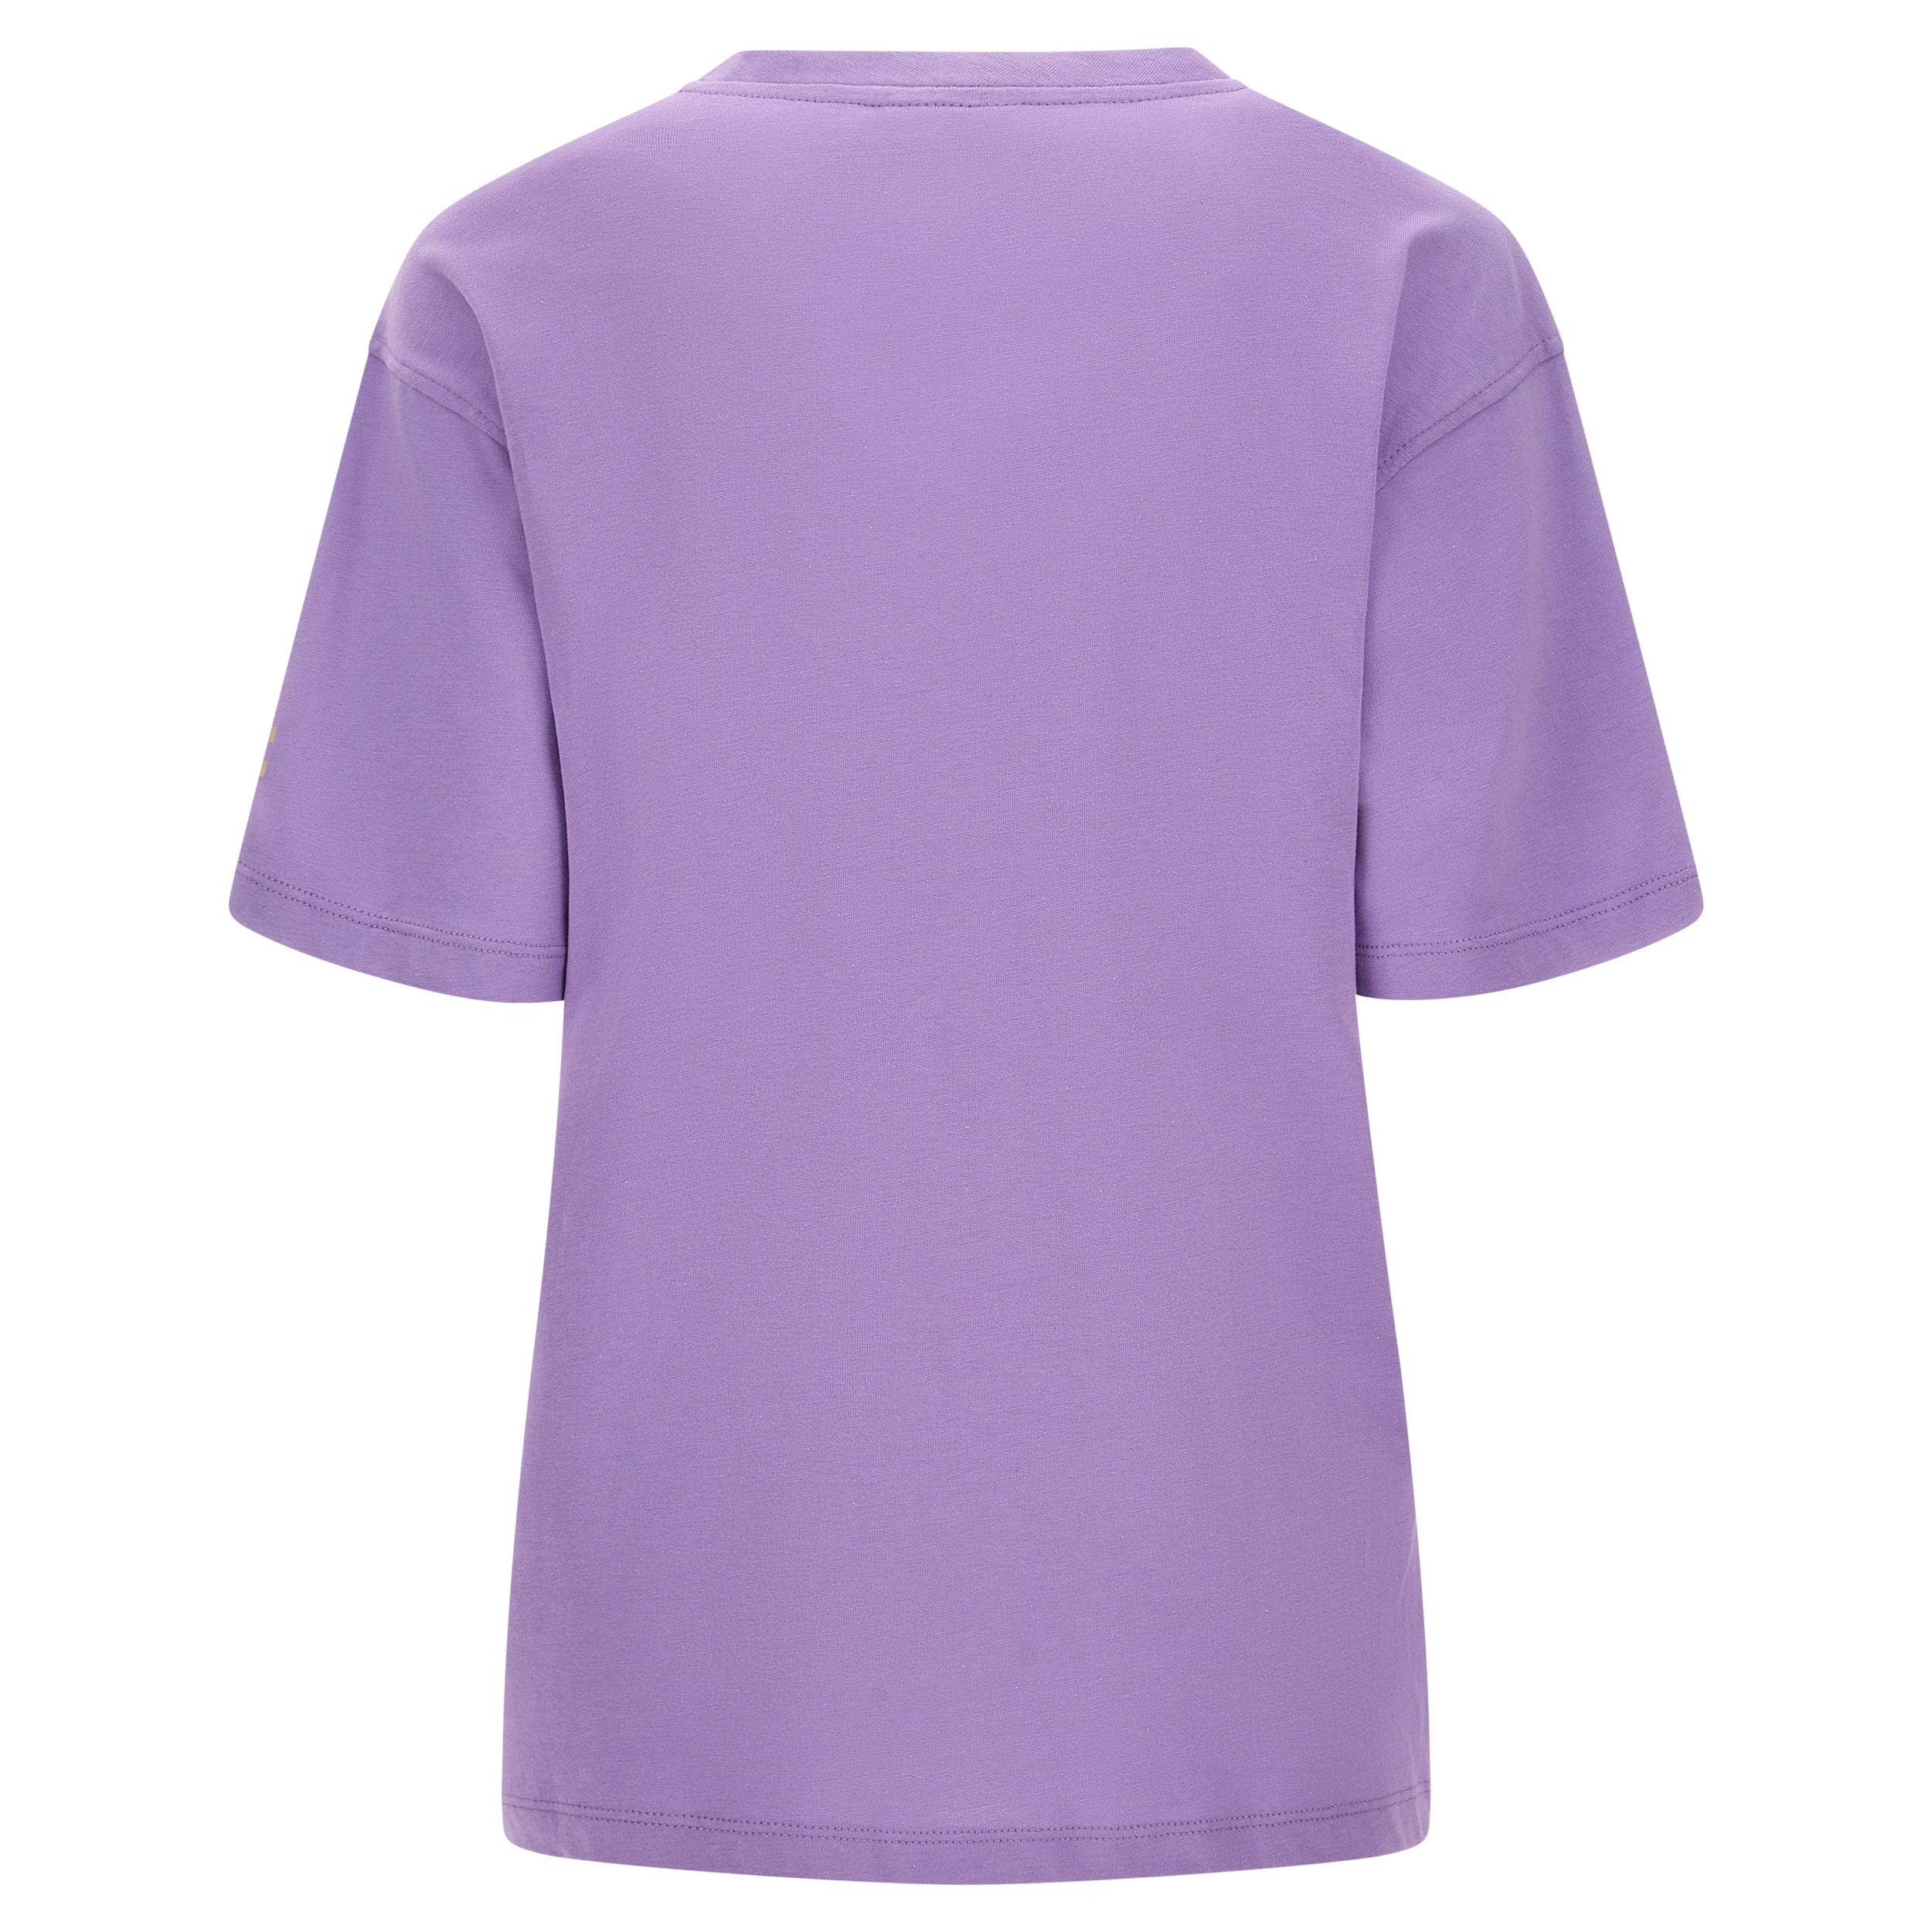 Comfort fit jersey t shirt with lettering  - English Lavender 2